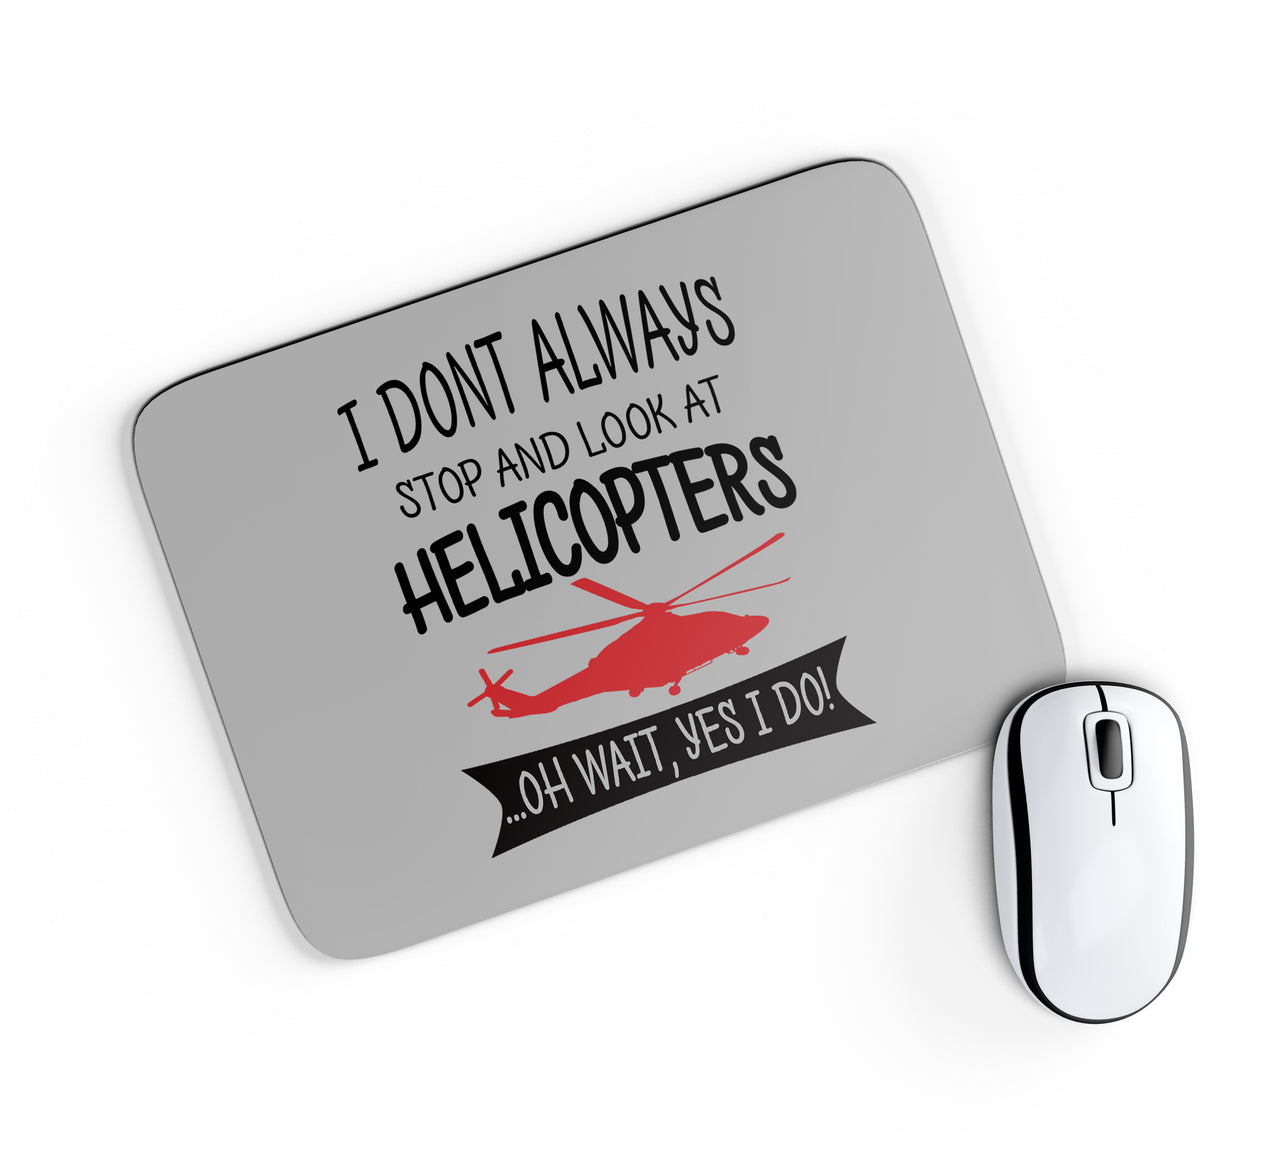 I Don't Always Stop and Look at Helicopters Designed Mouse Pads